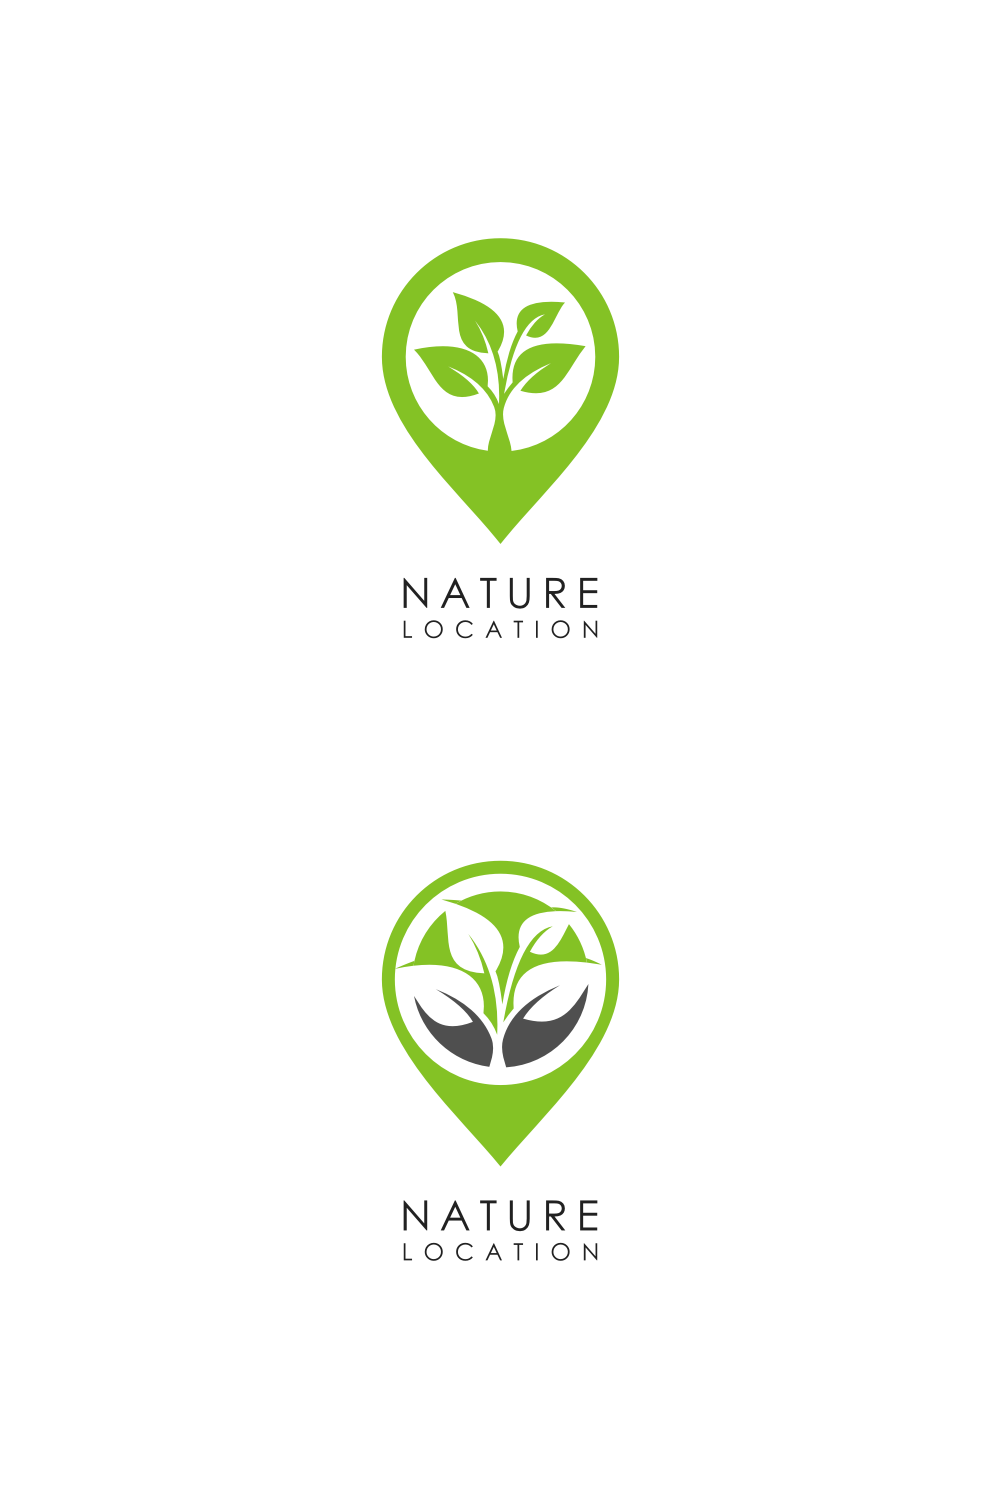 Pinterest preview with Nature Leaf Location Logo Vector Design.